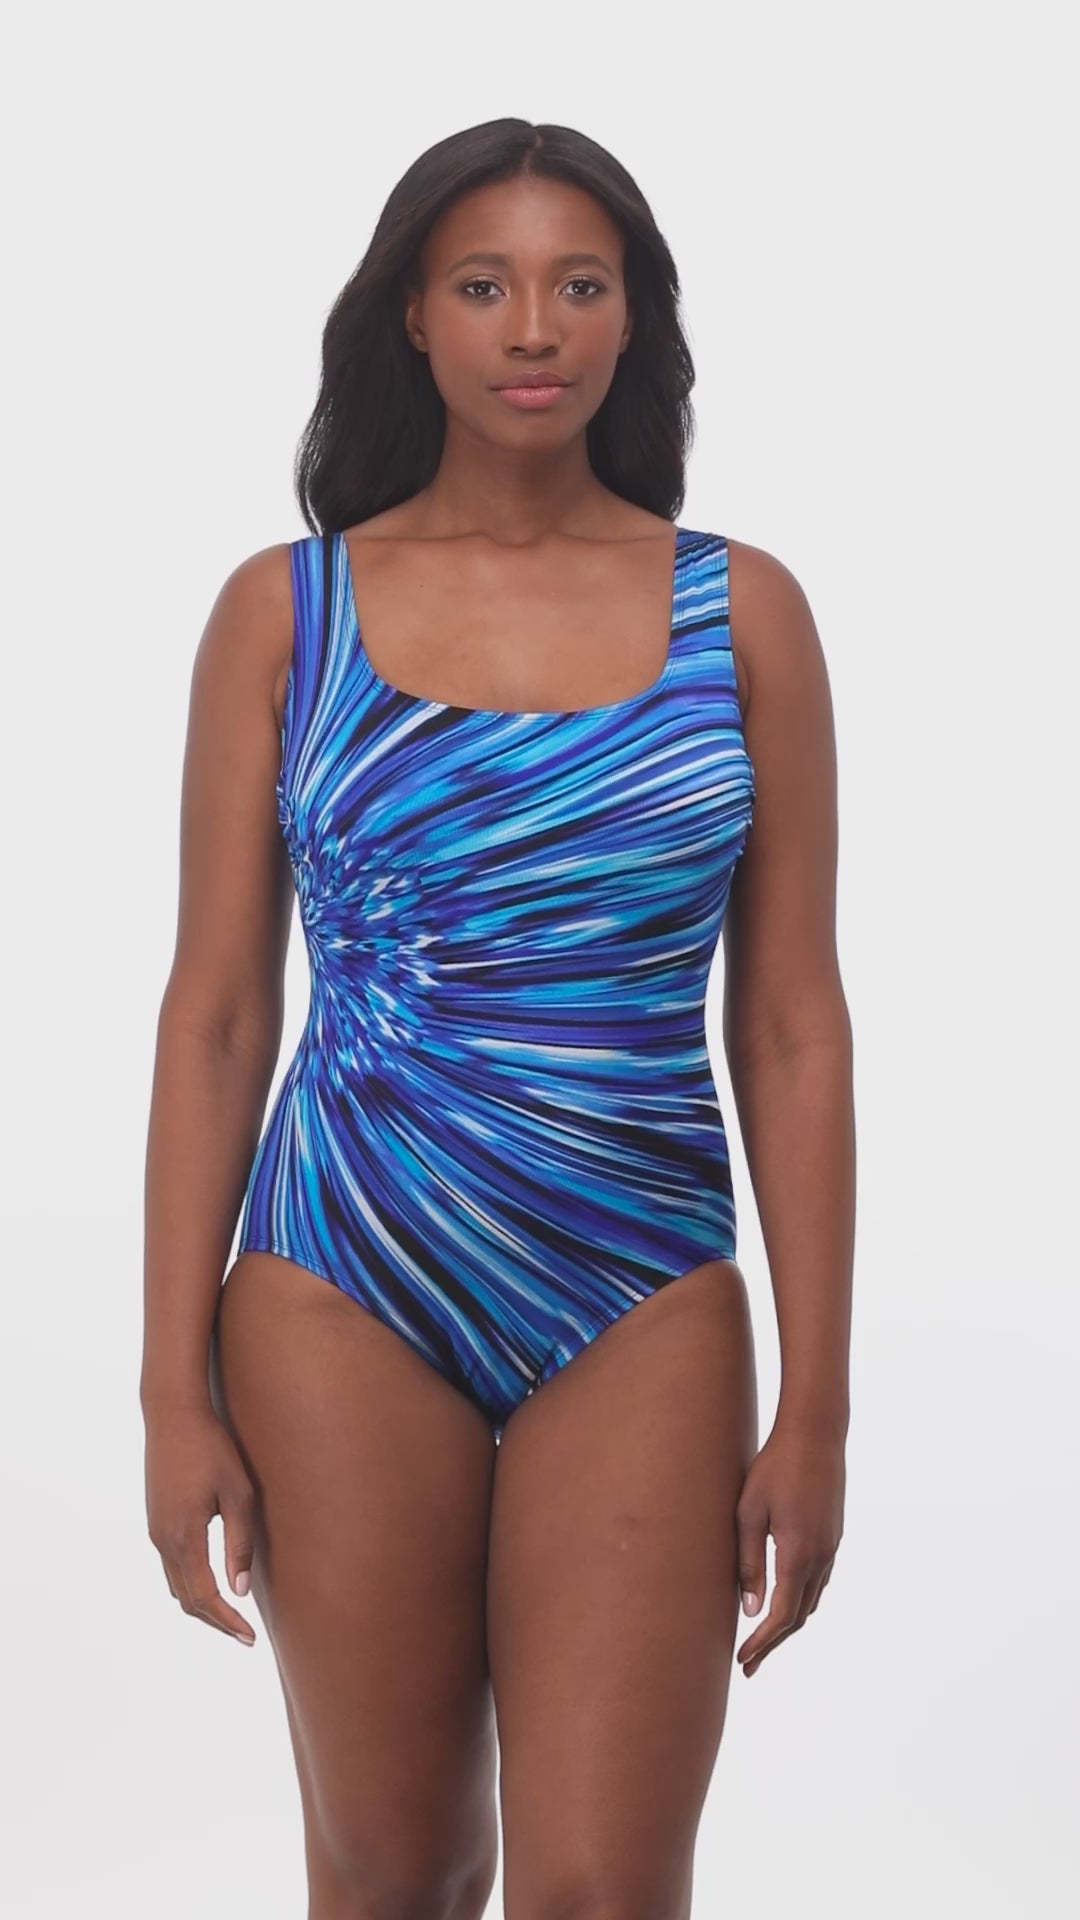 Model turning 360 degrees wearing a scoop back tank one piece in a blue, navy, black and white striped print